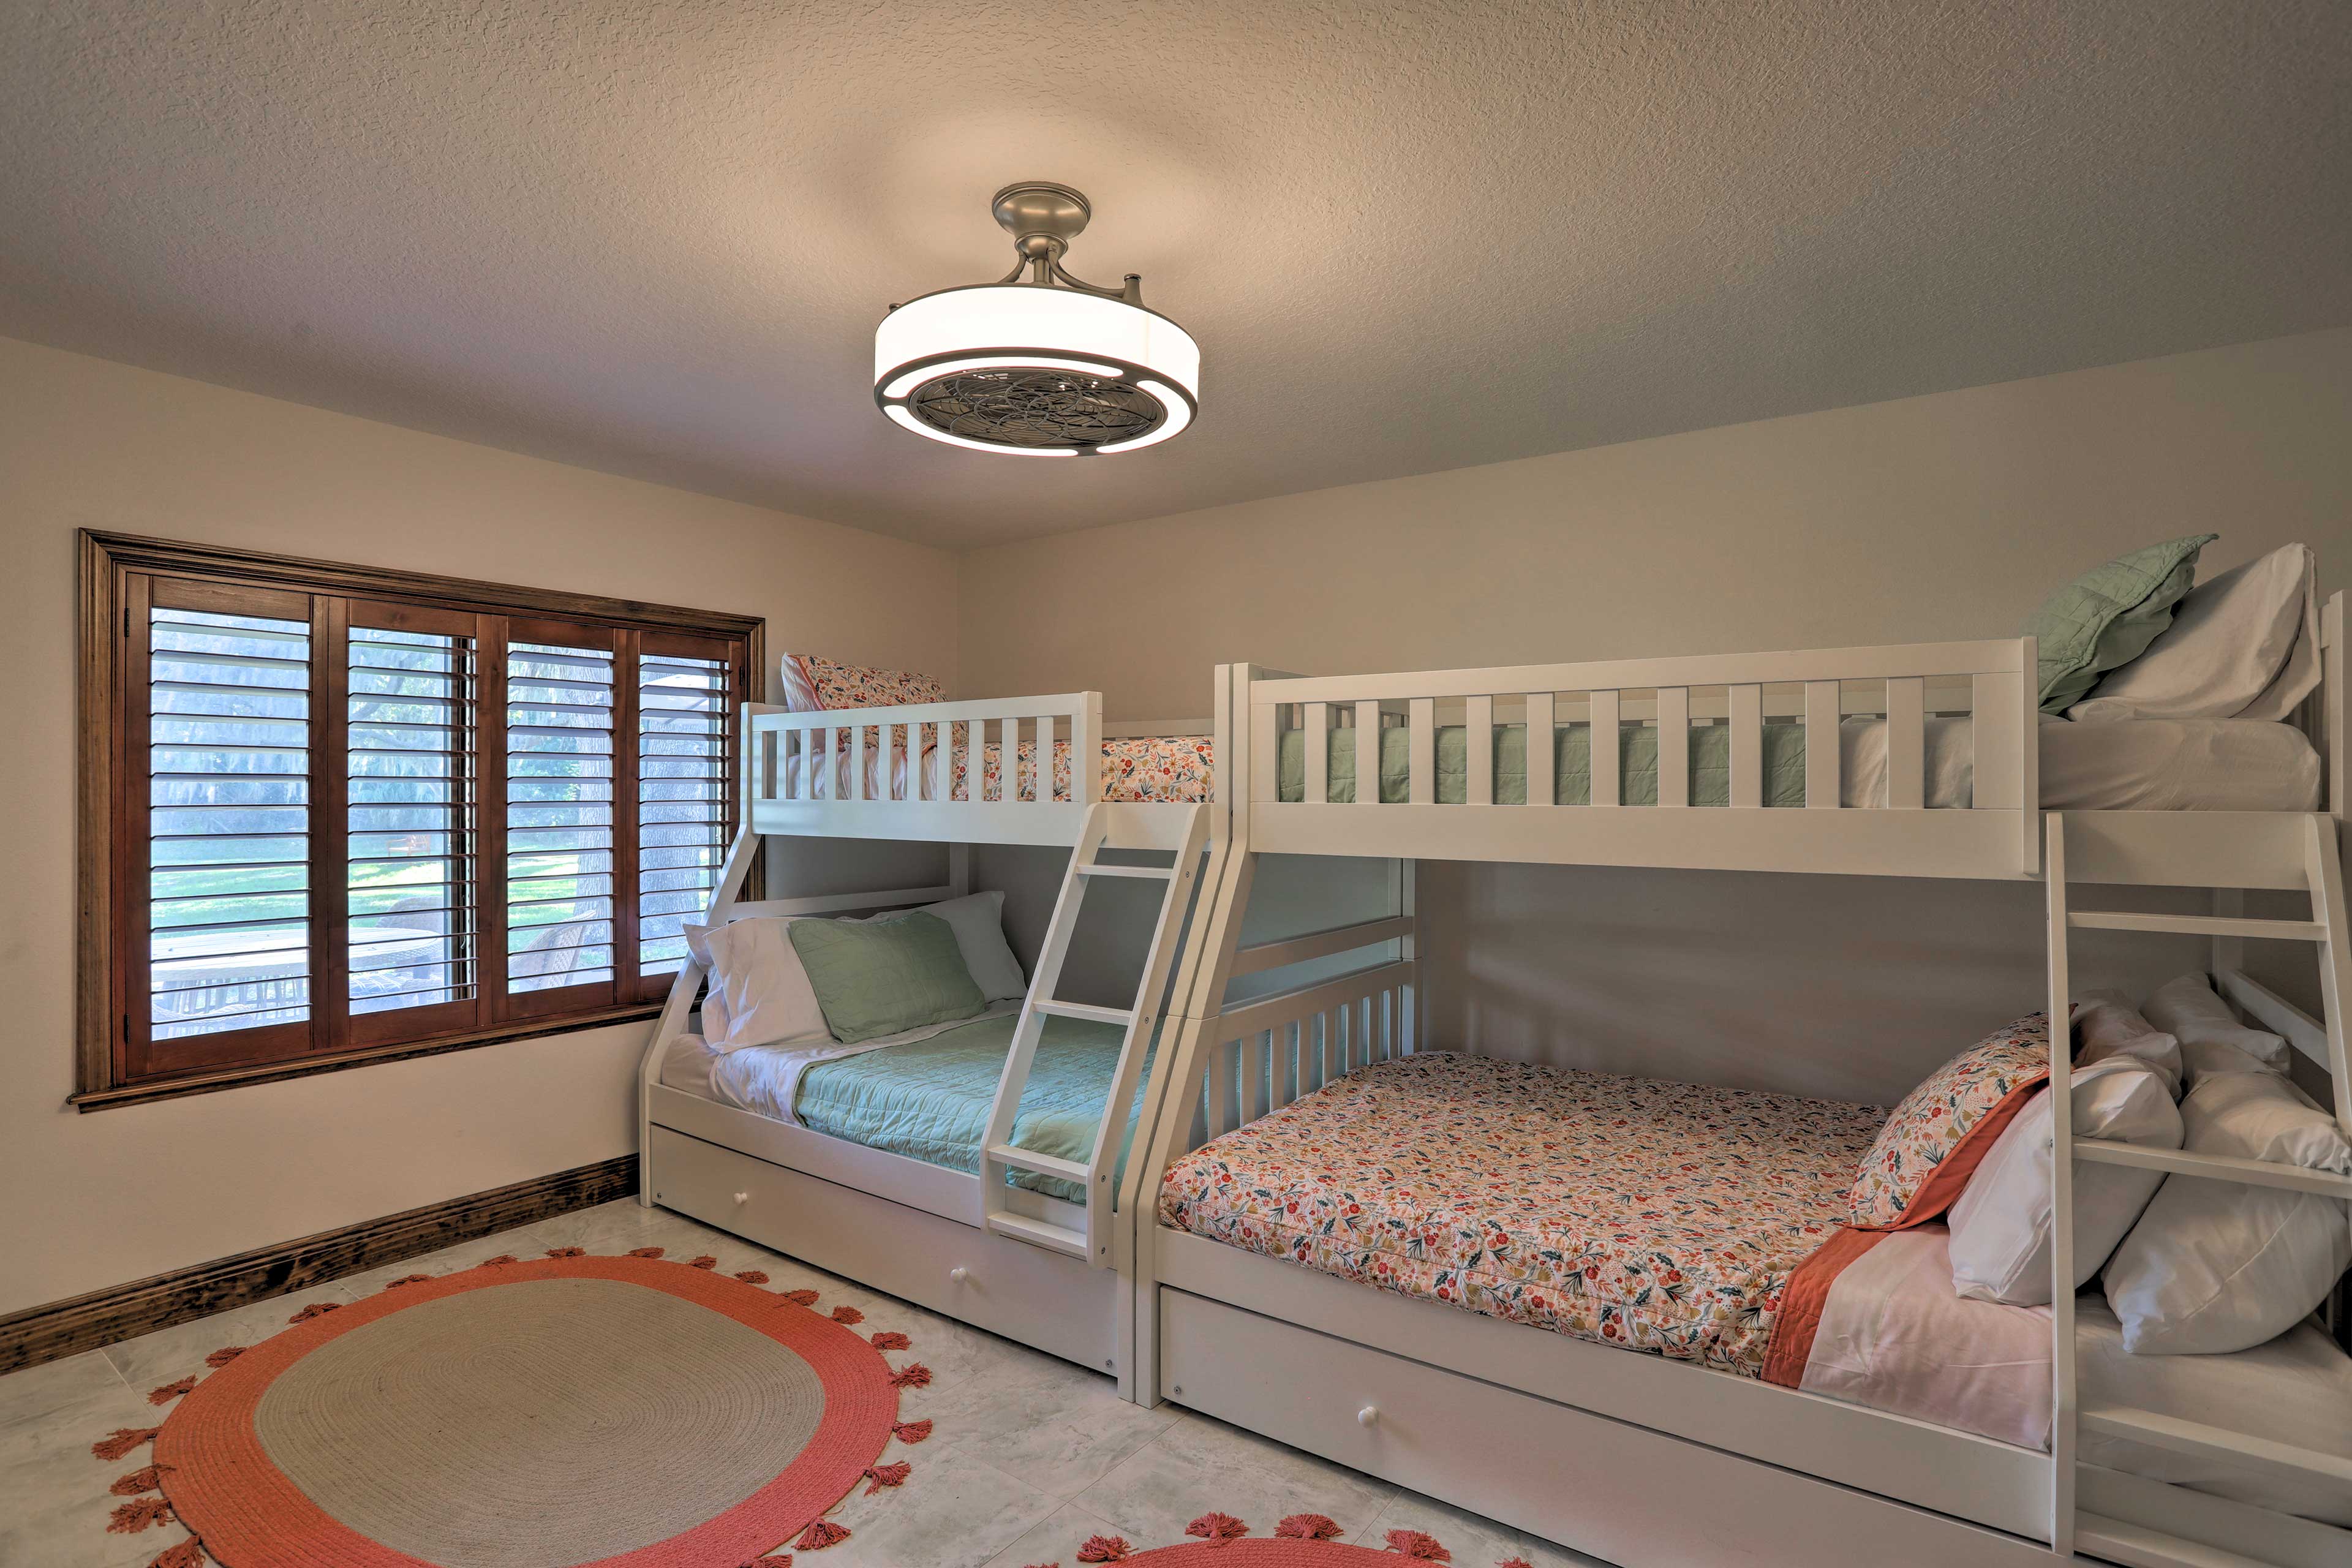 Bedroom 3 | 2 Twin/Full Bunk Beds | Twin Trundles | Main Level